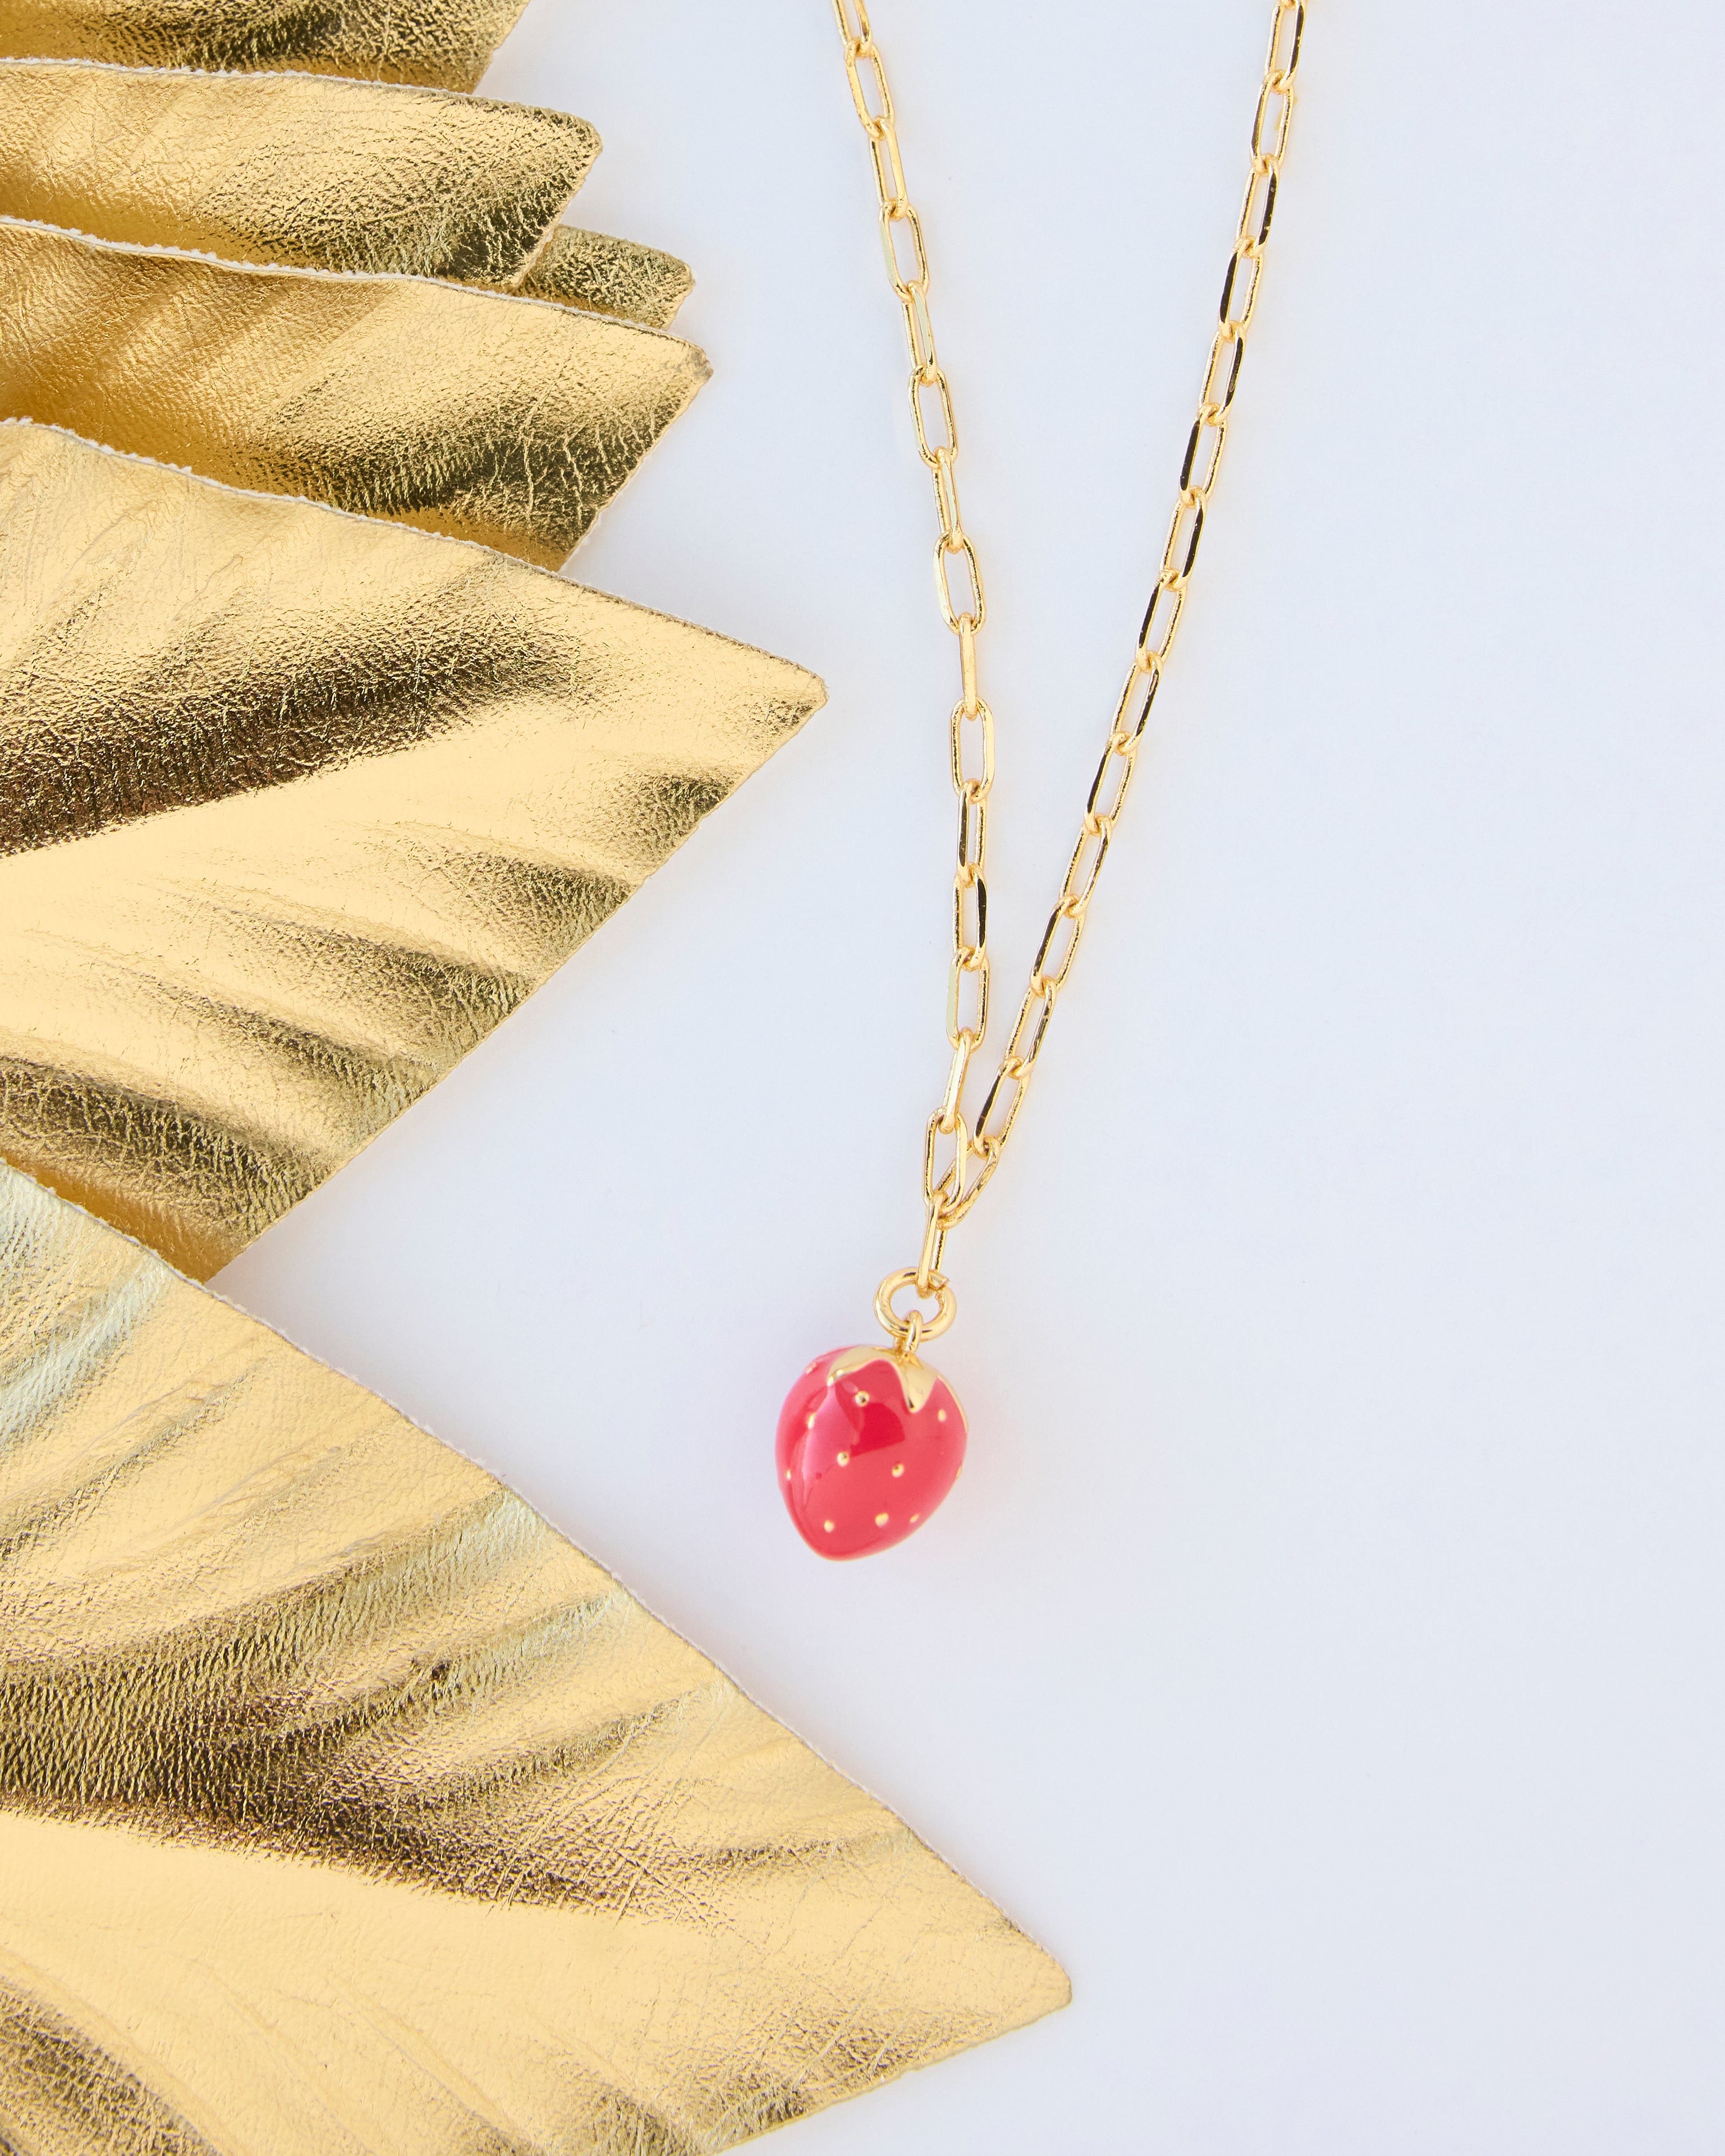 Gold necklace with a red strawberry charm.